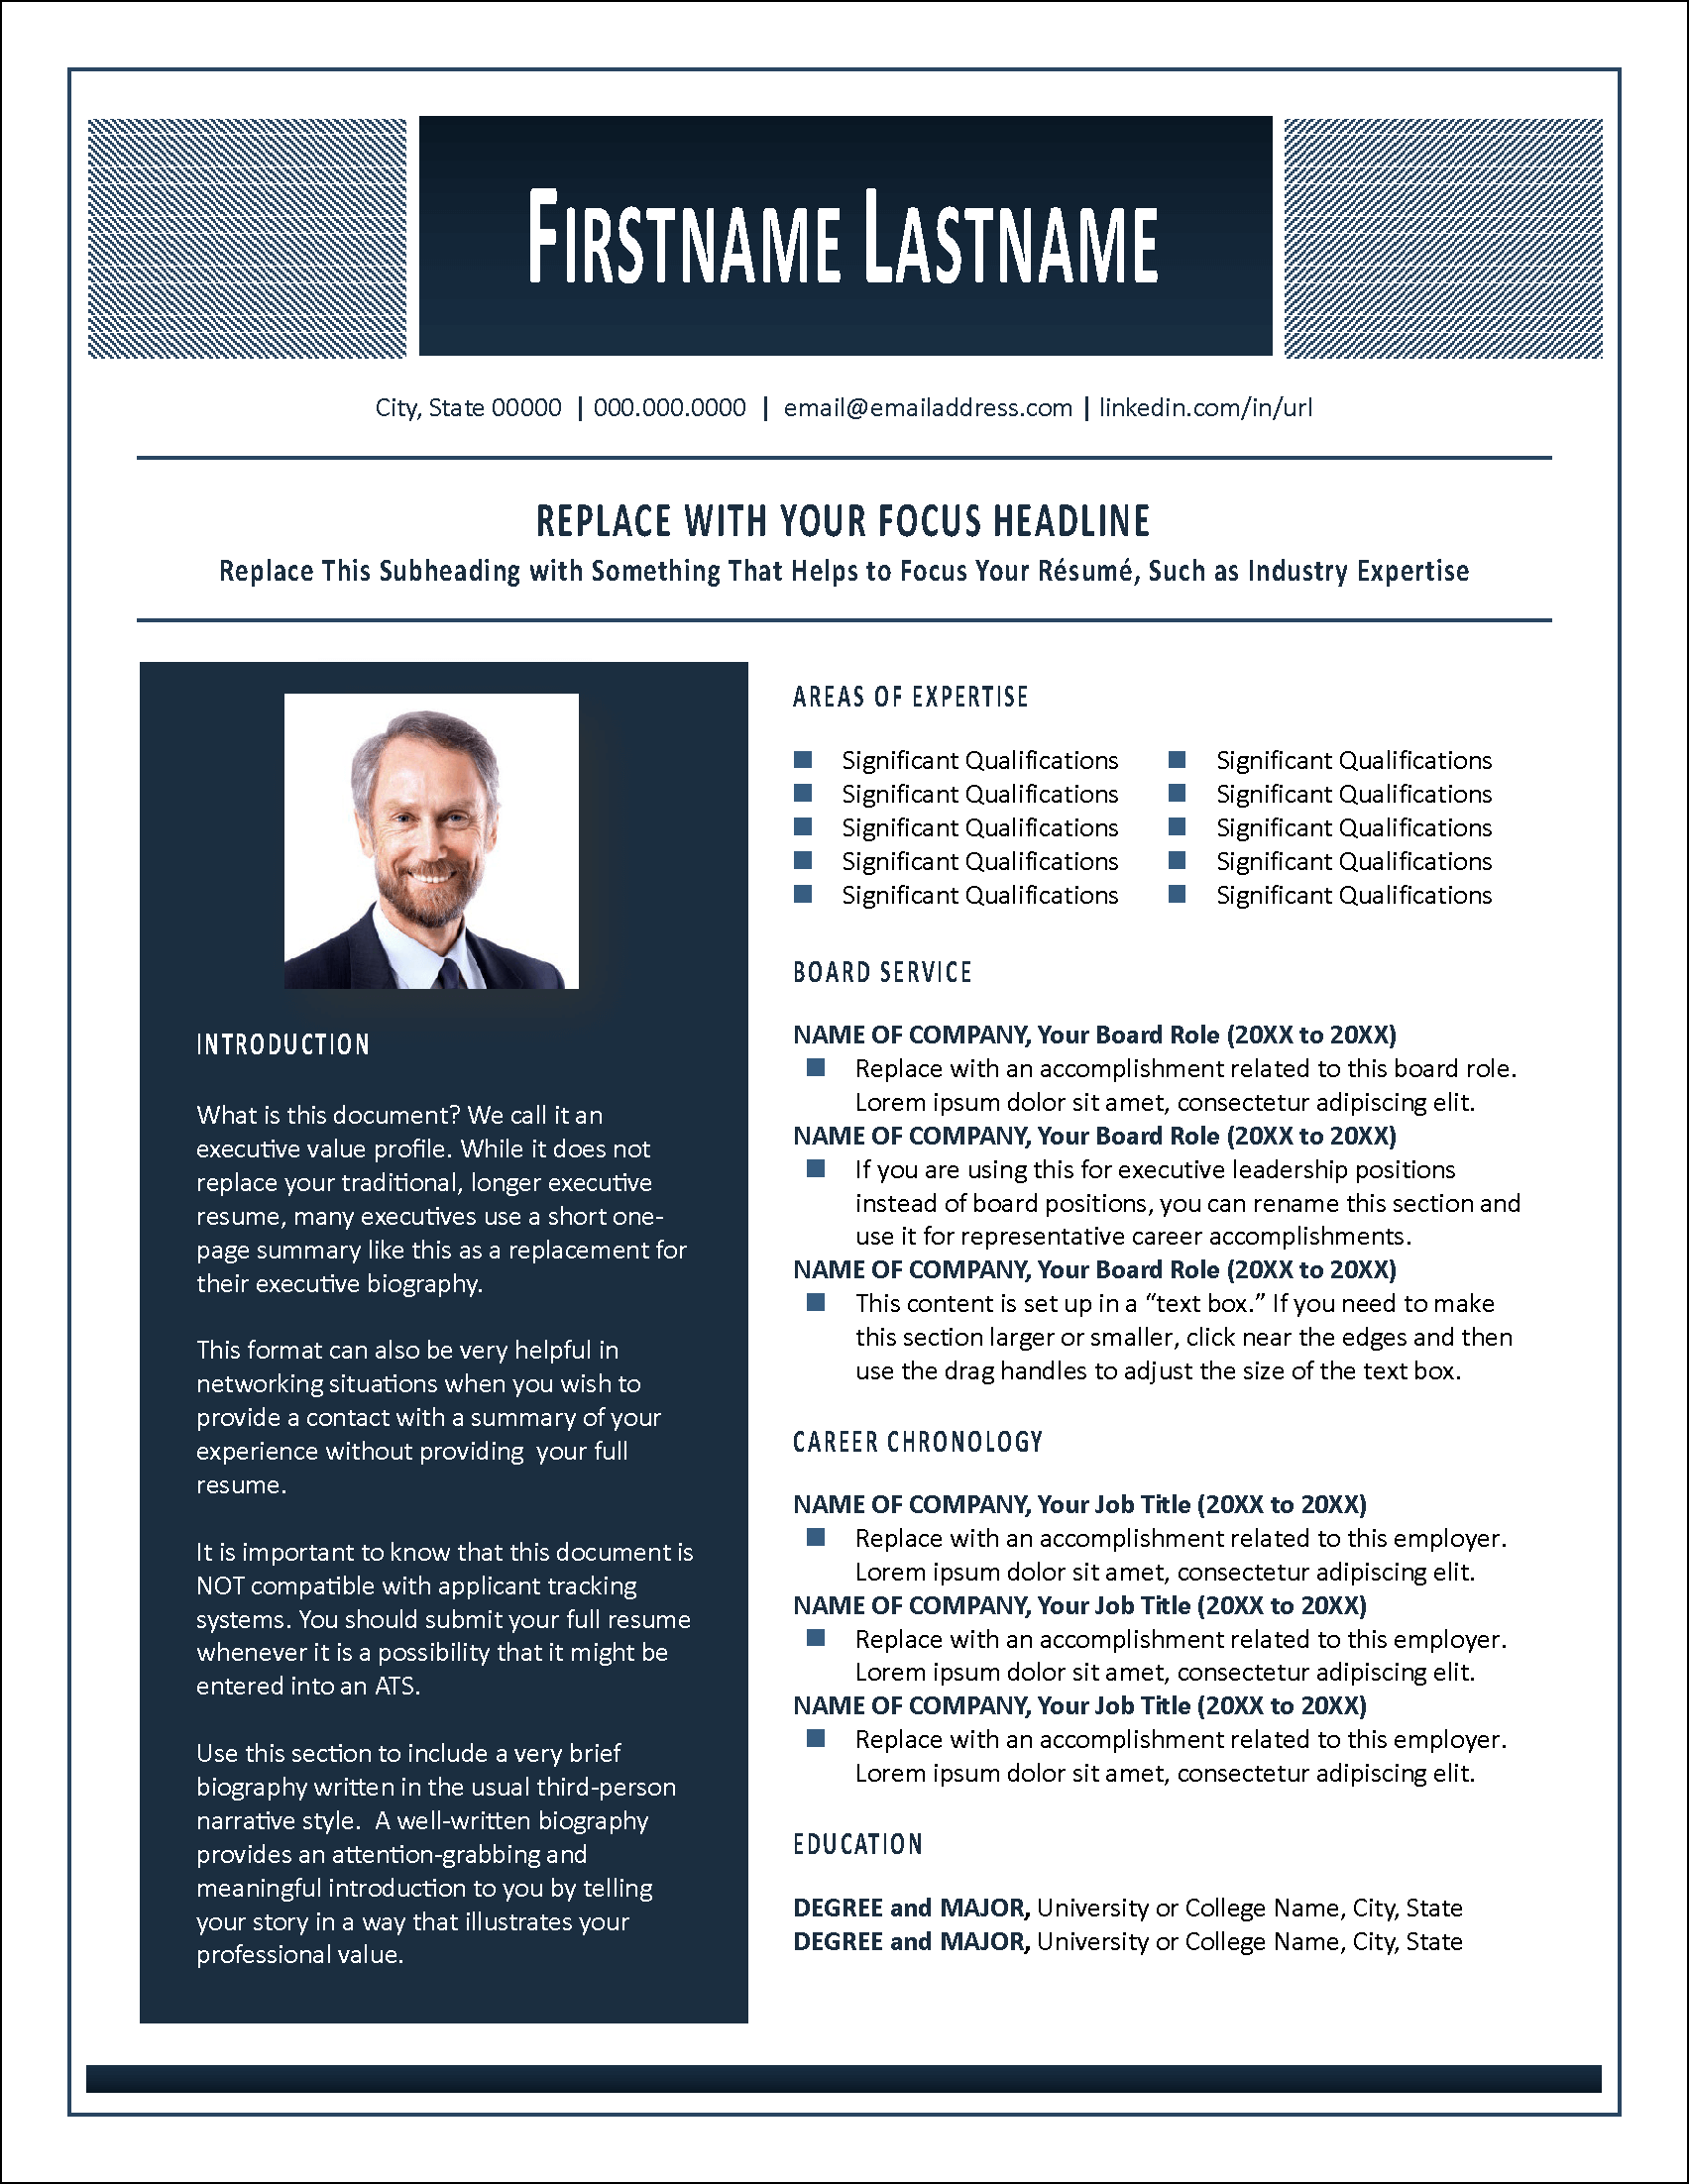 Structured Edge Networking Resume